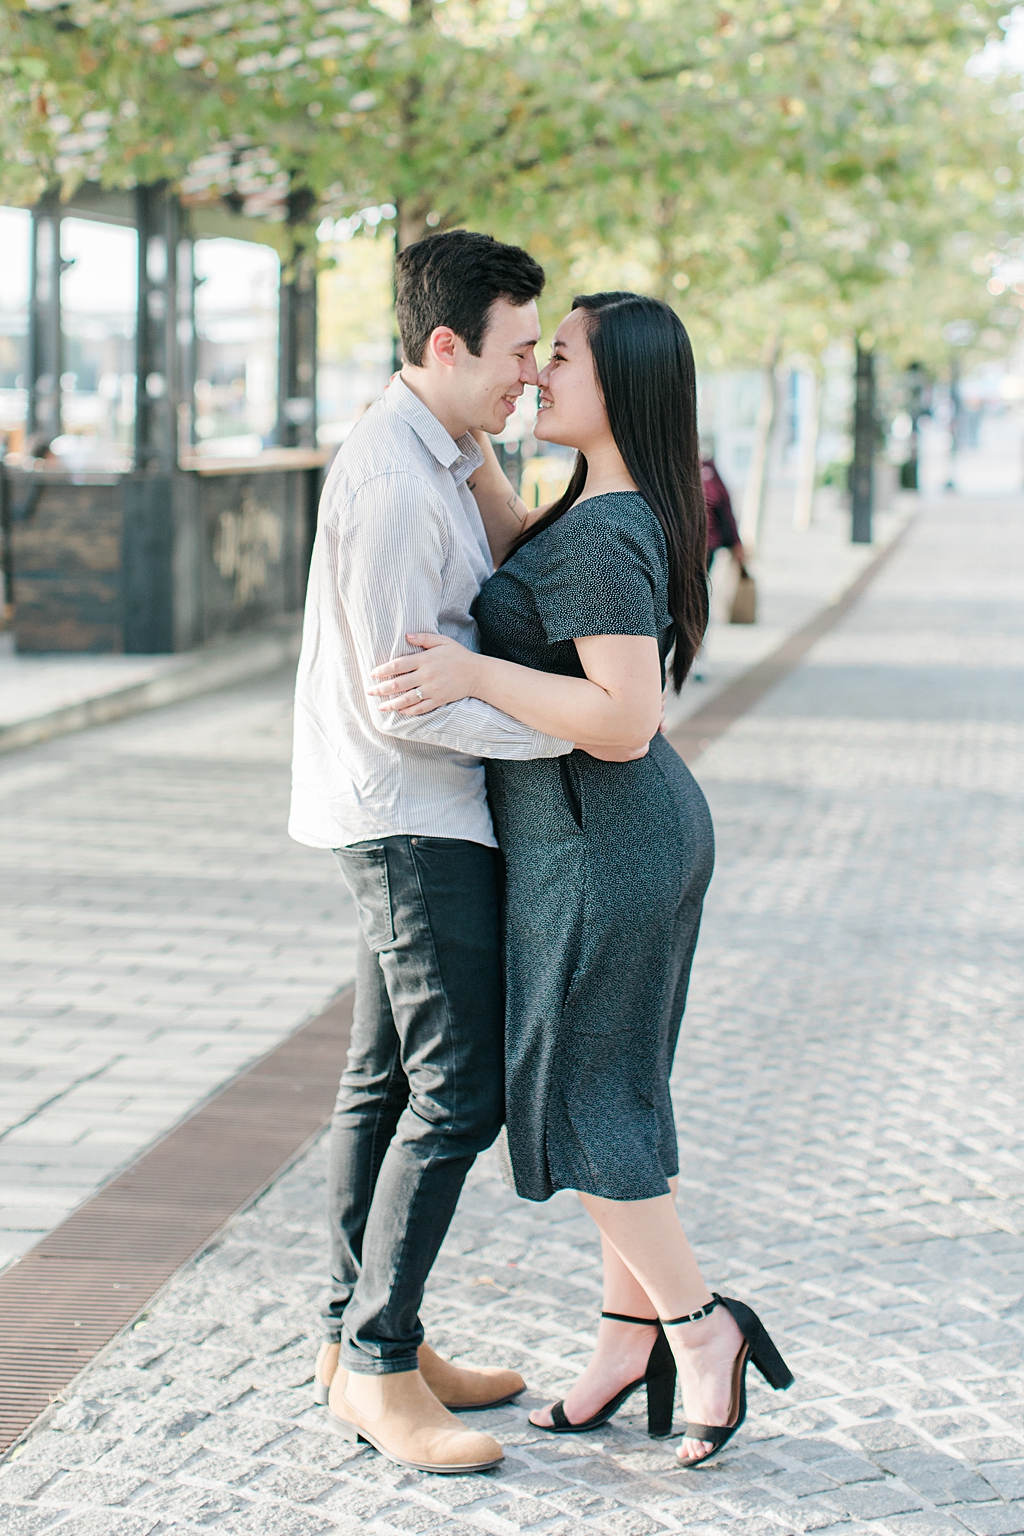 Becky_Collin_Navy_Yards_Park_The_Wharf_Washington_DC_Fall_Engagement_Session_AngelikaJohnsPhotography-7598.jpg